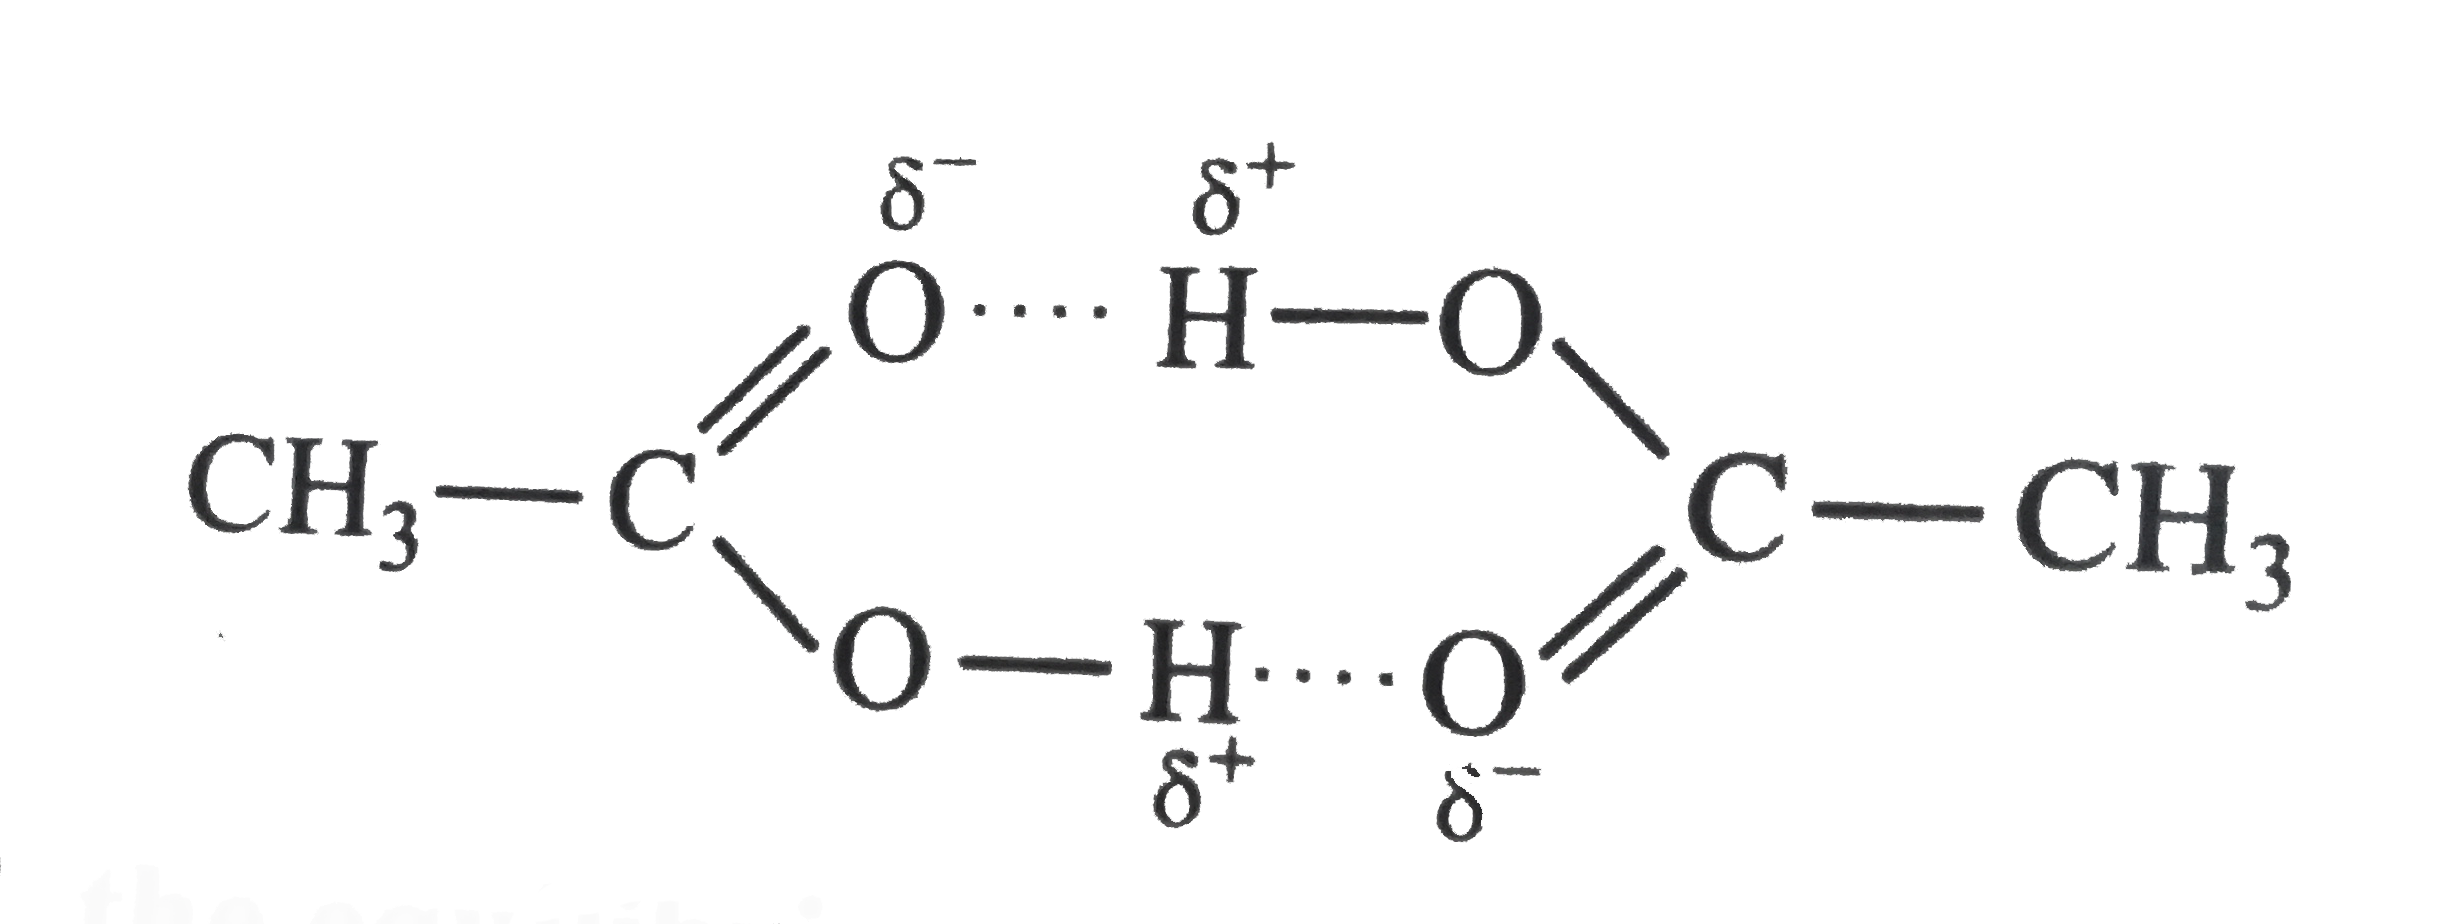 Acetic acid CH(3)COOH can form a dimer (CH(3)COOH)(2) in the gas phase. The dimer is held togther by two H-bonds with a total strength of 60.0 kJ per mole of dimer      If at 25^(@)C, the equilibrium constant for the dimerisation is 1.3 xx 10^(3), calculate DeltaS^(Theta) for the reaction   2CH(3)COOH (g) hArr (CH(3)COOH)(2)(g)